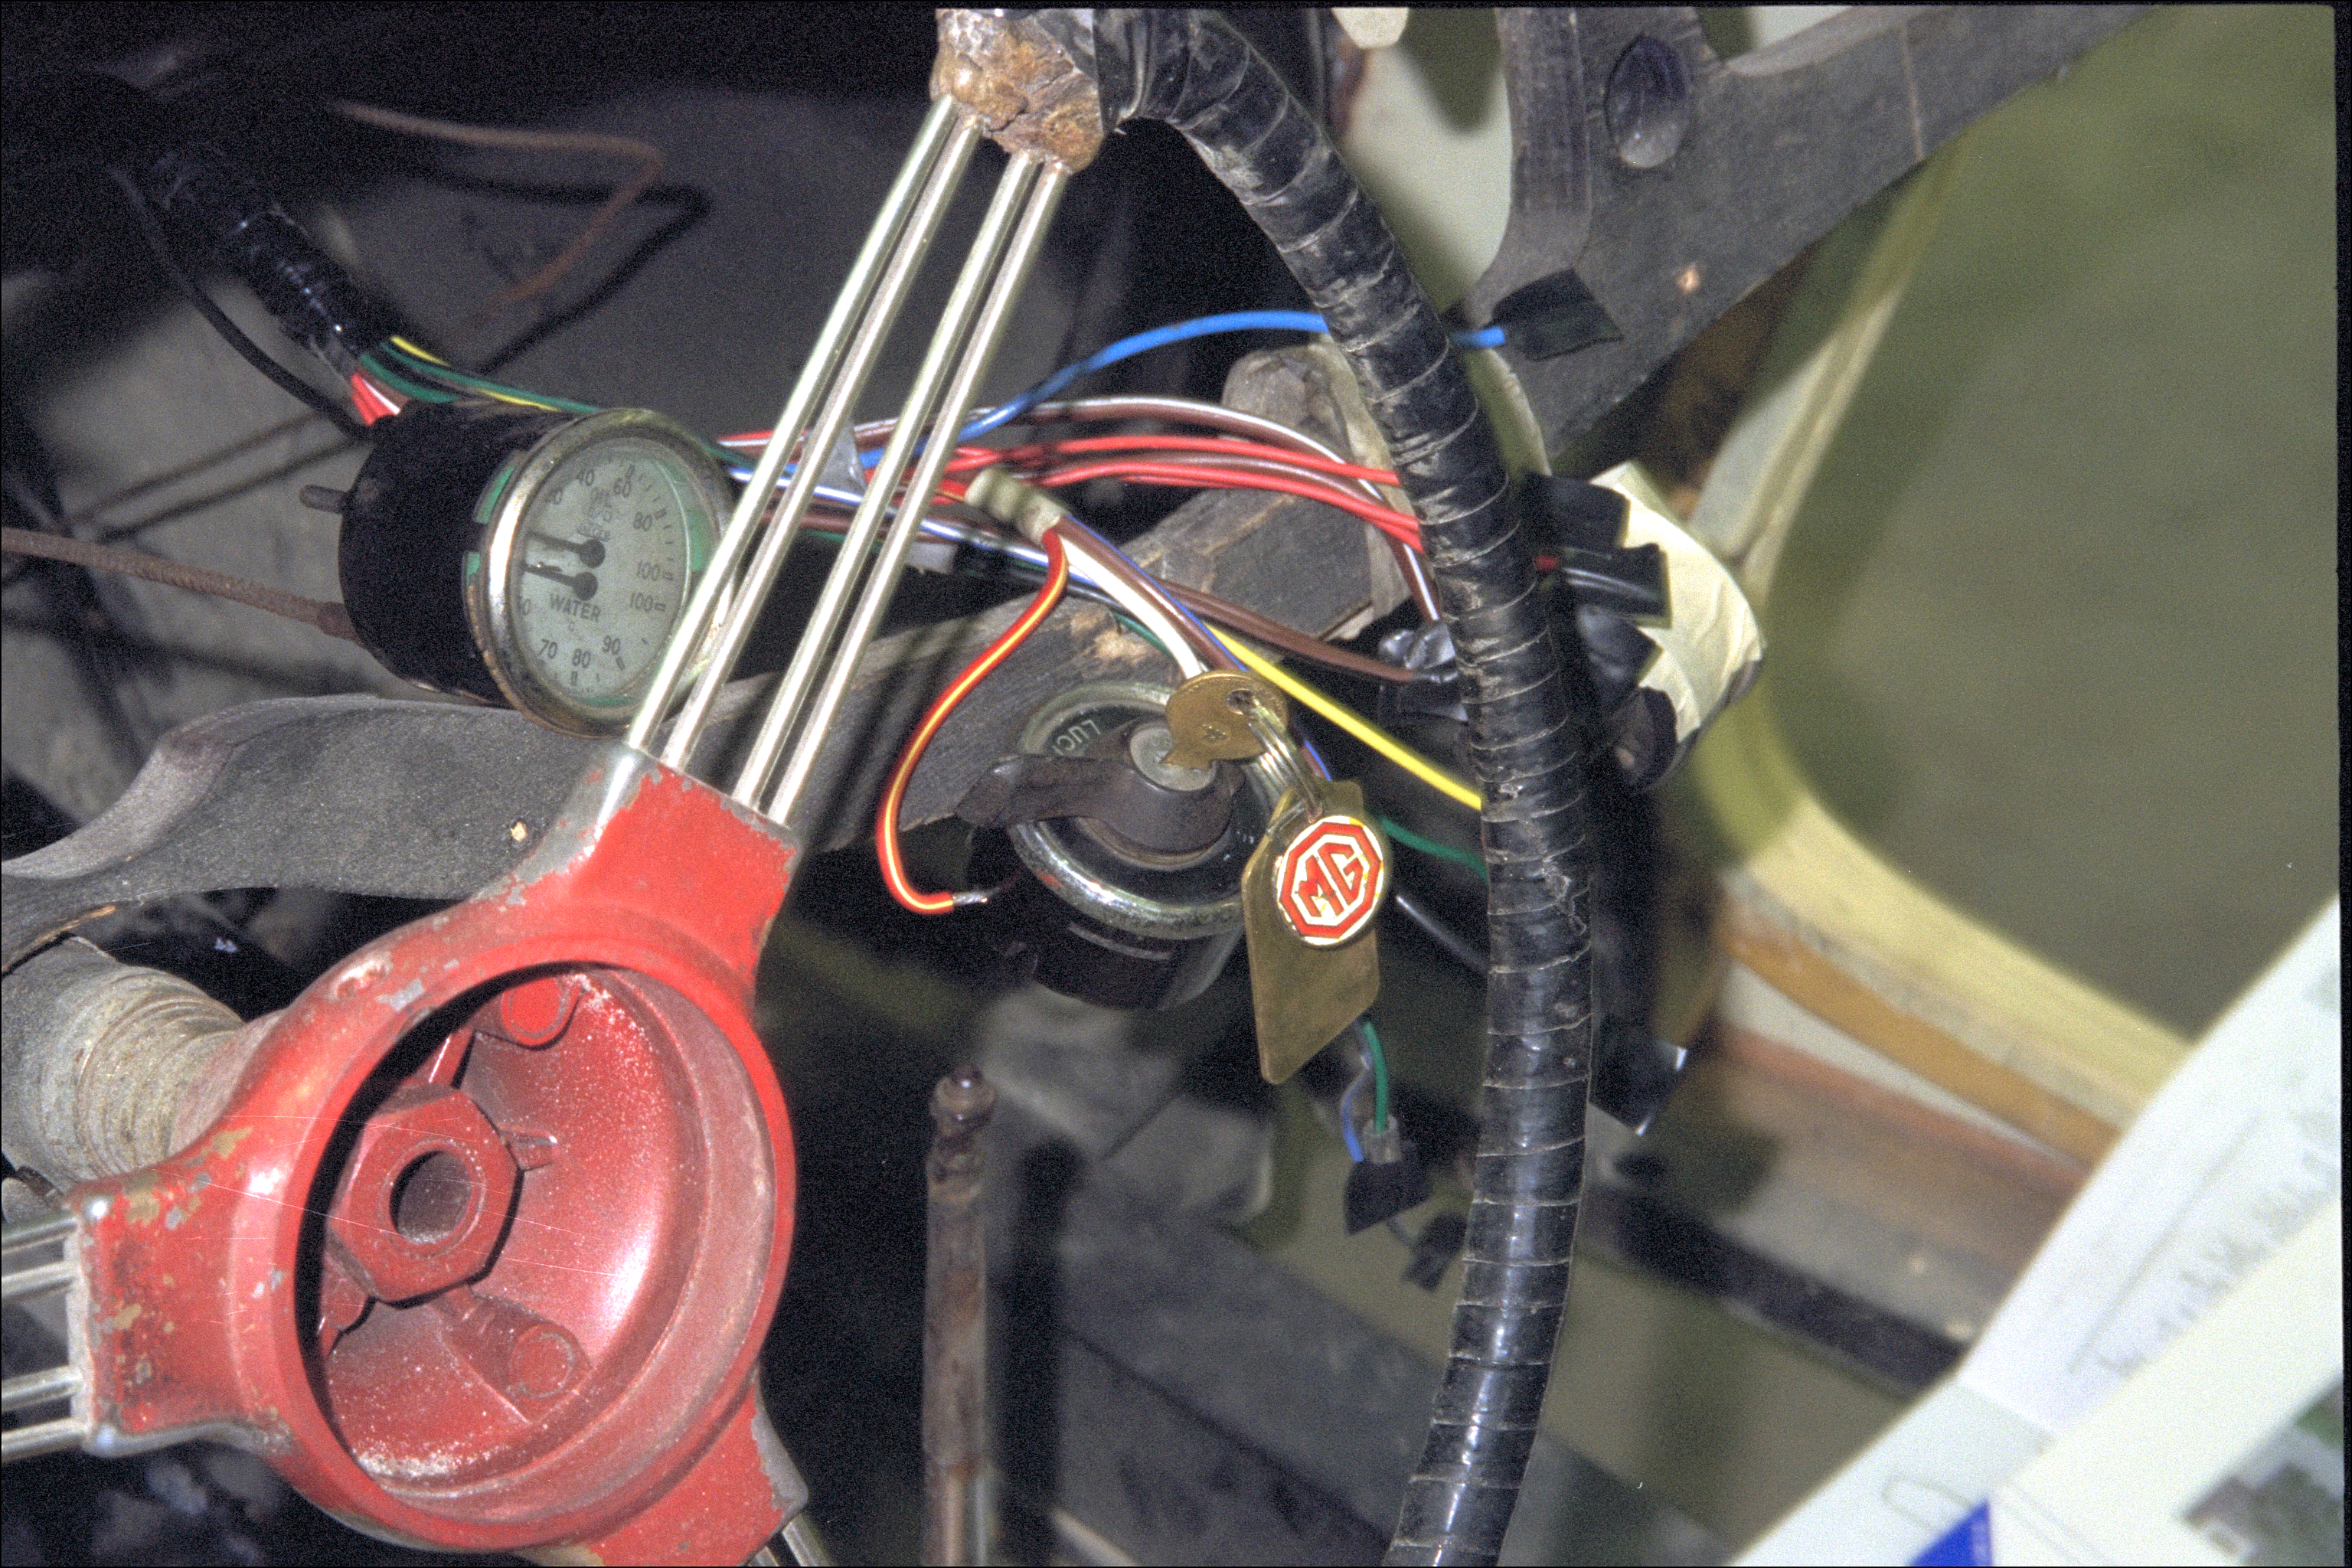 Oil pressure gauge and Ignition circuit for test